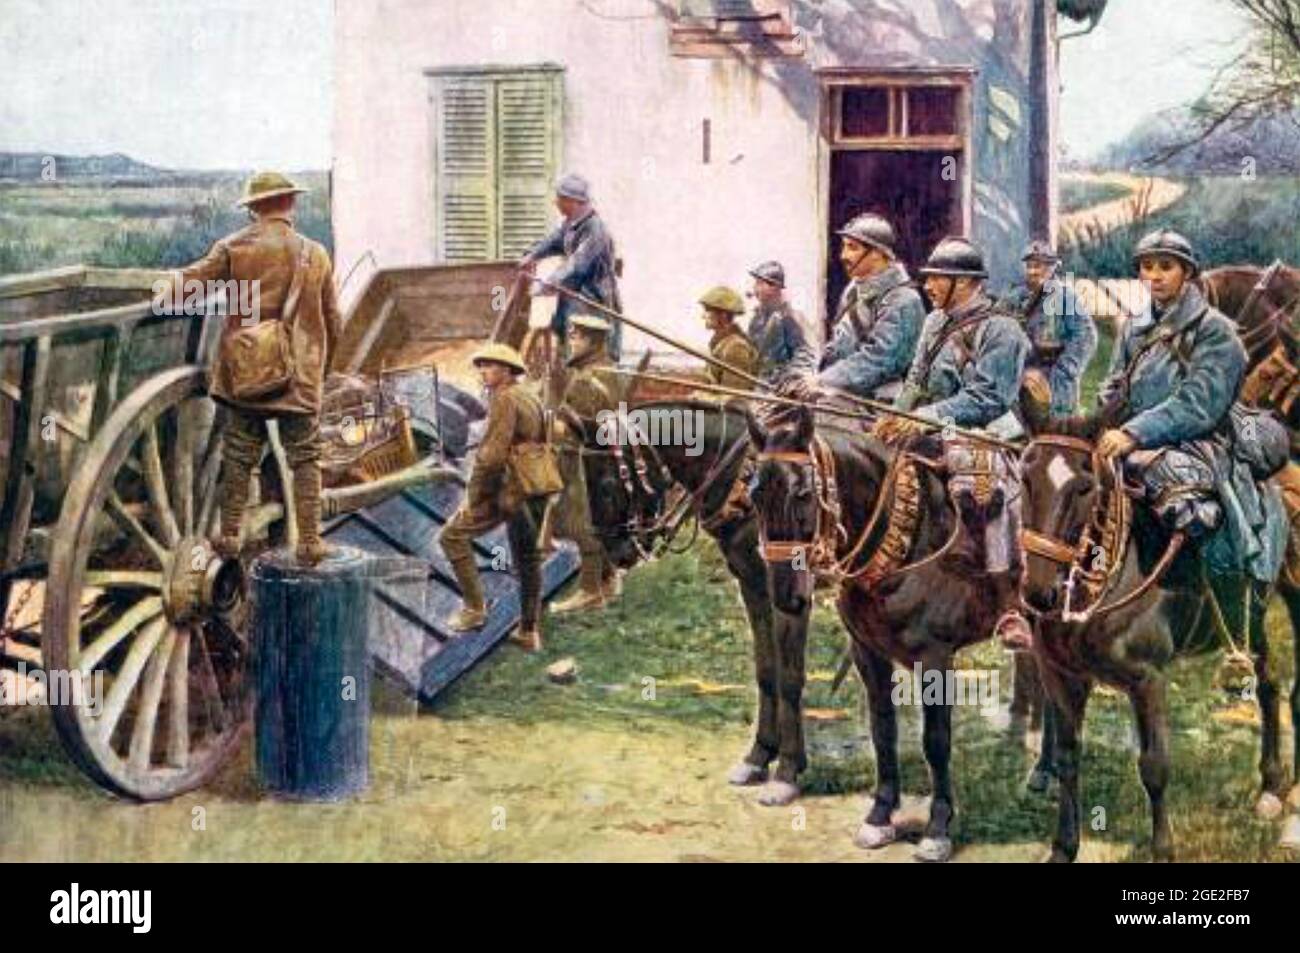 ANGLO-FRENCH OUTPOST in WW1. French cavalry wait behind a farm cart arricade built by British soldiers. Stock Photo